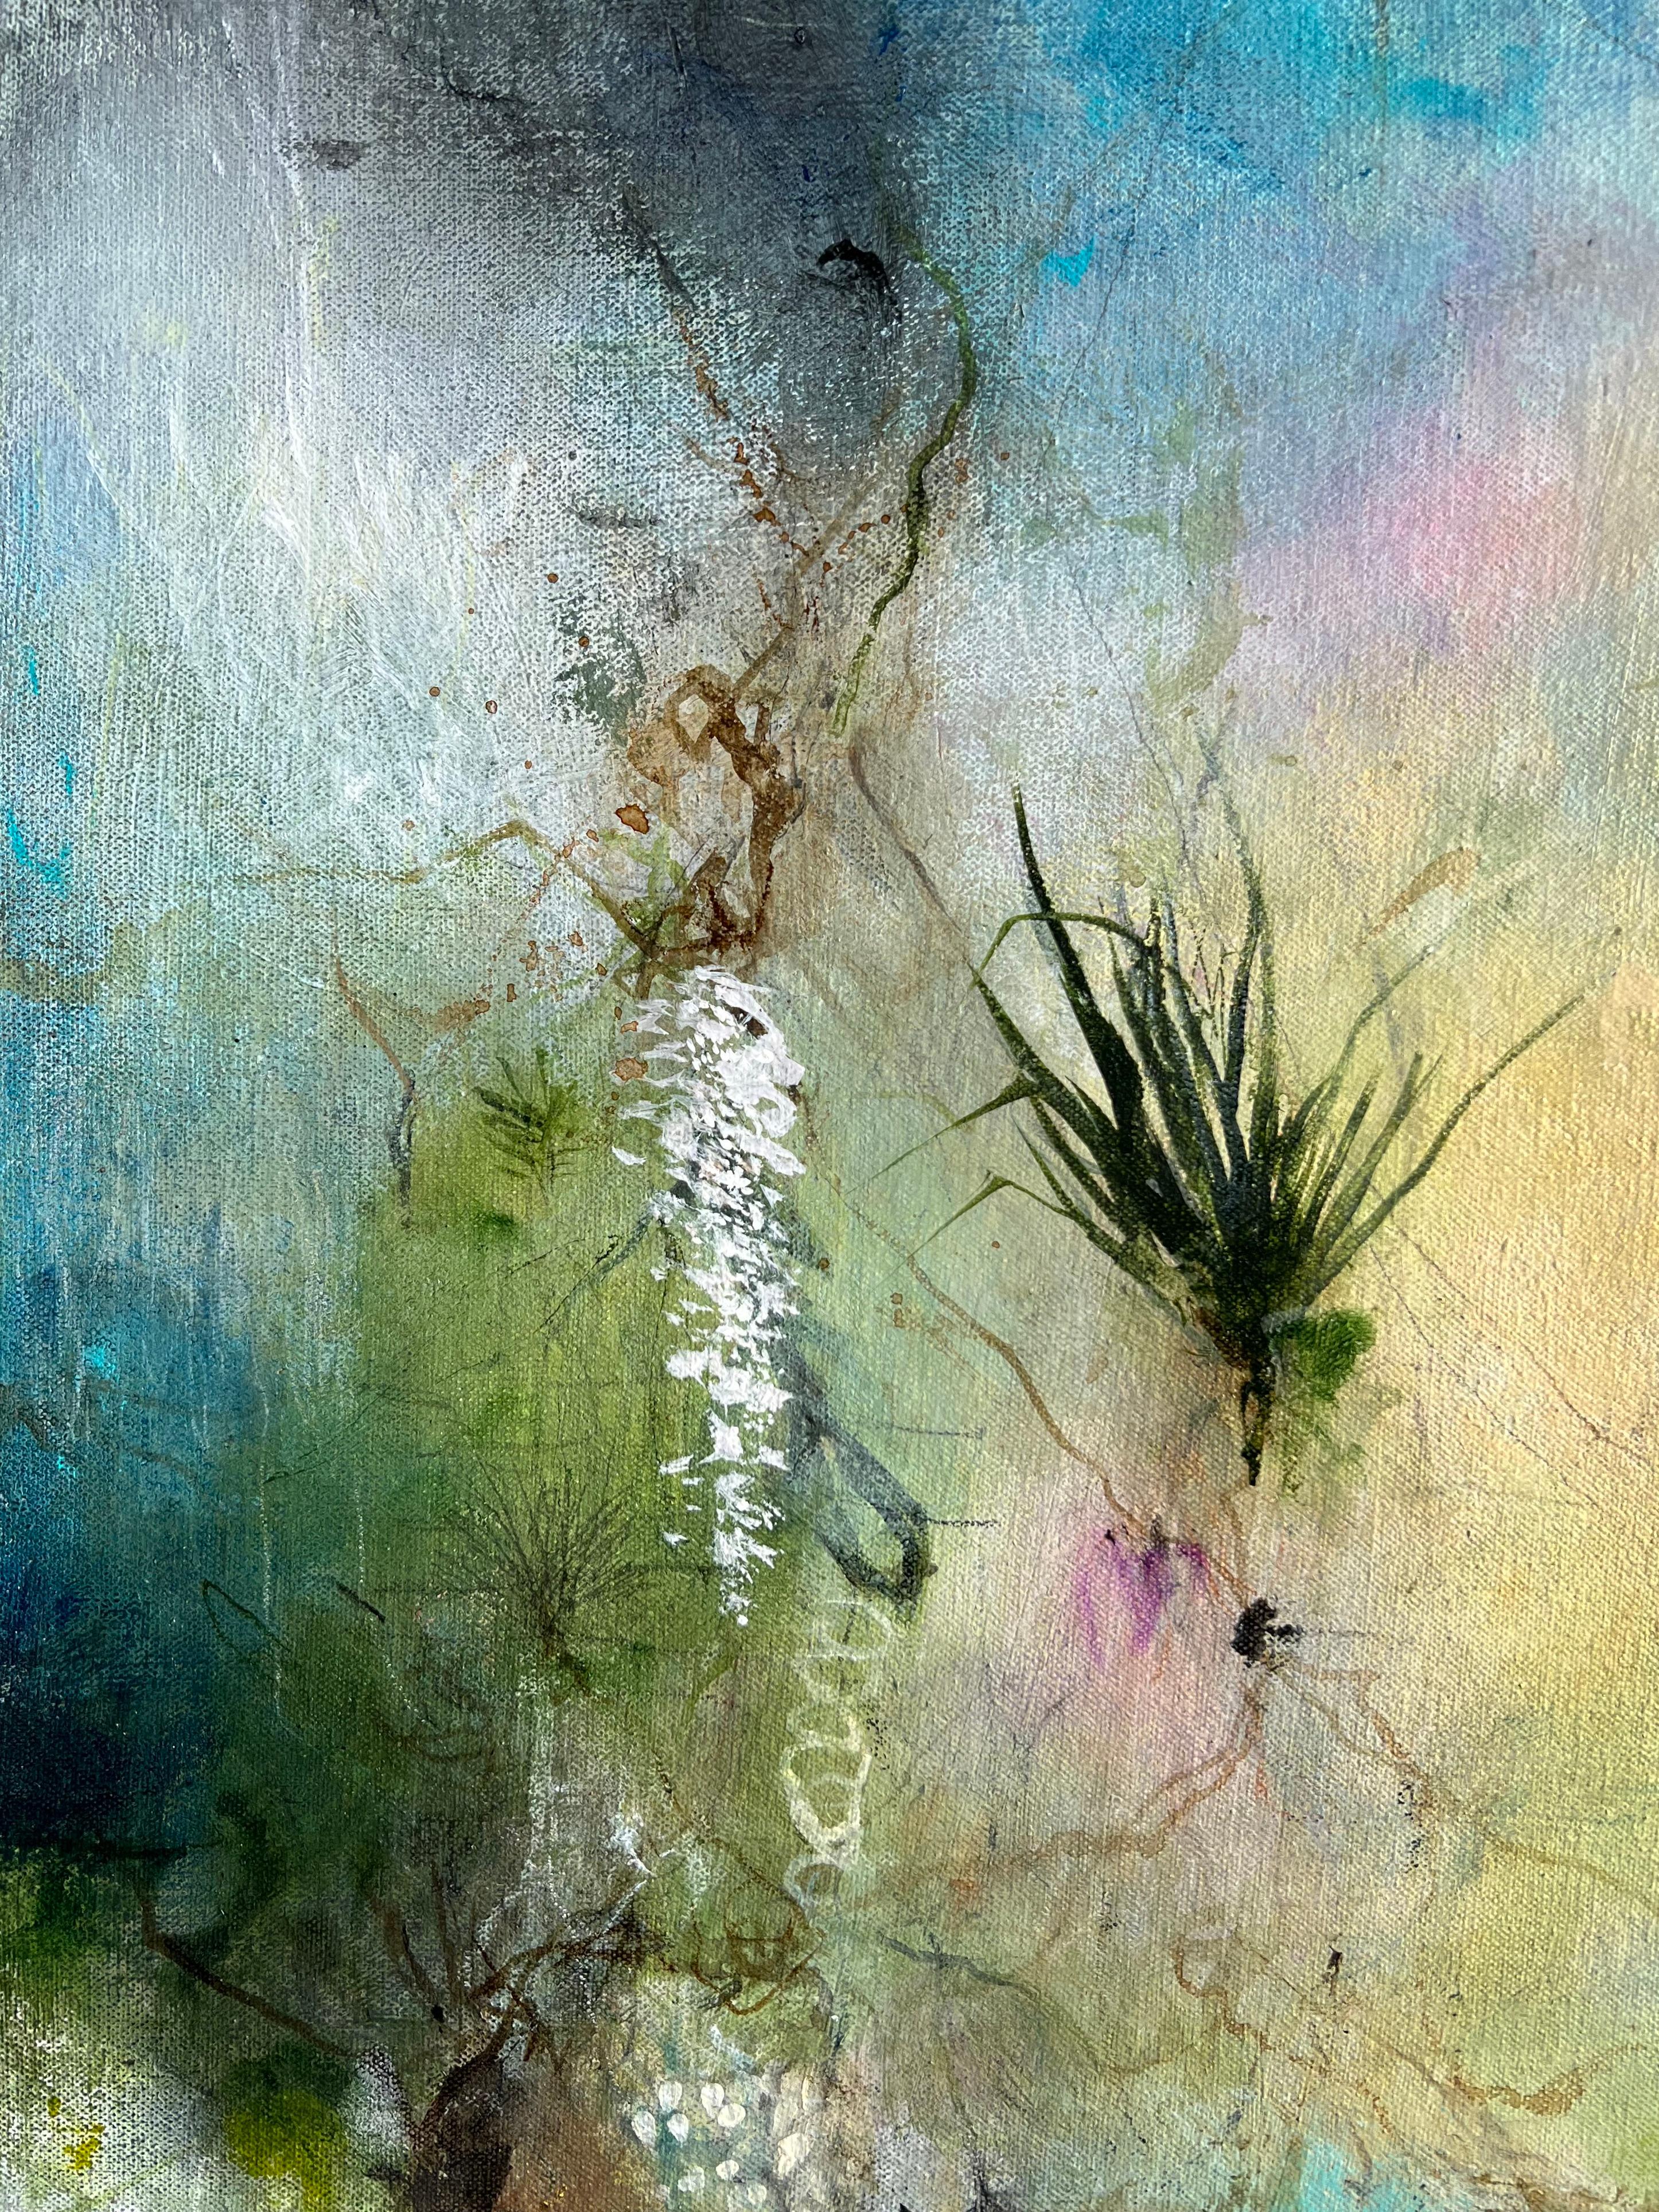 Rather than re-creating a literal landscape on canvas or paper, I aim to express its essence in a rich and complex form of delicately painted organic subjects that float and trail across the surface. Fragmentary plant forms drift within color